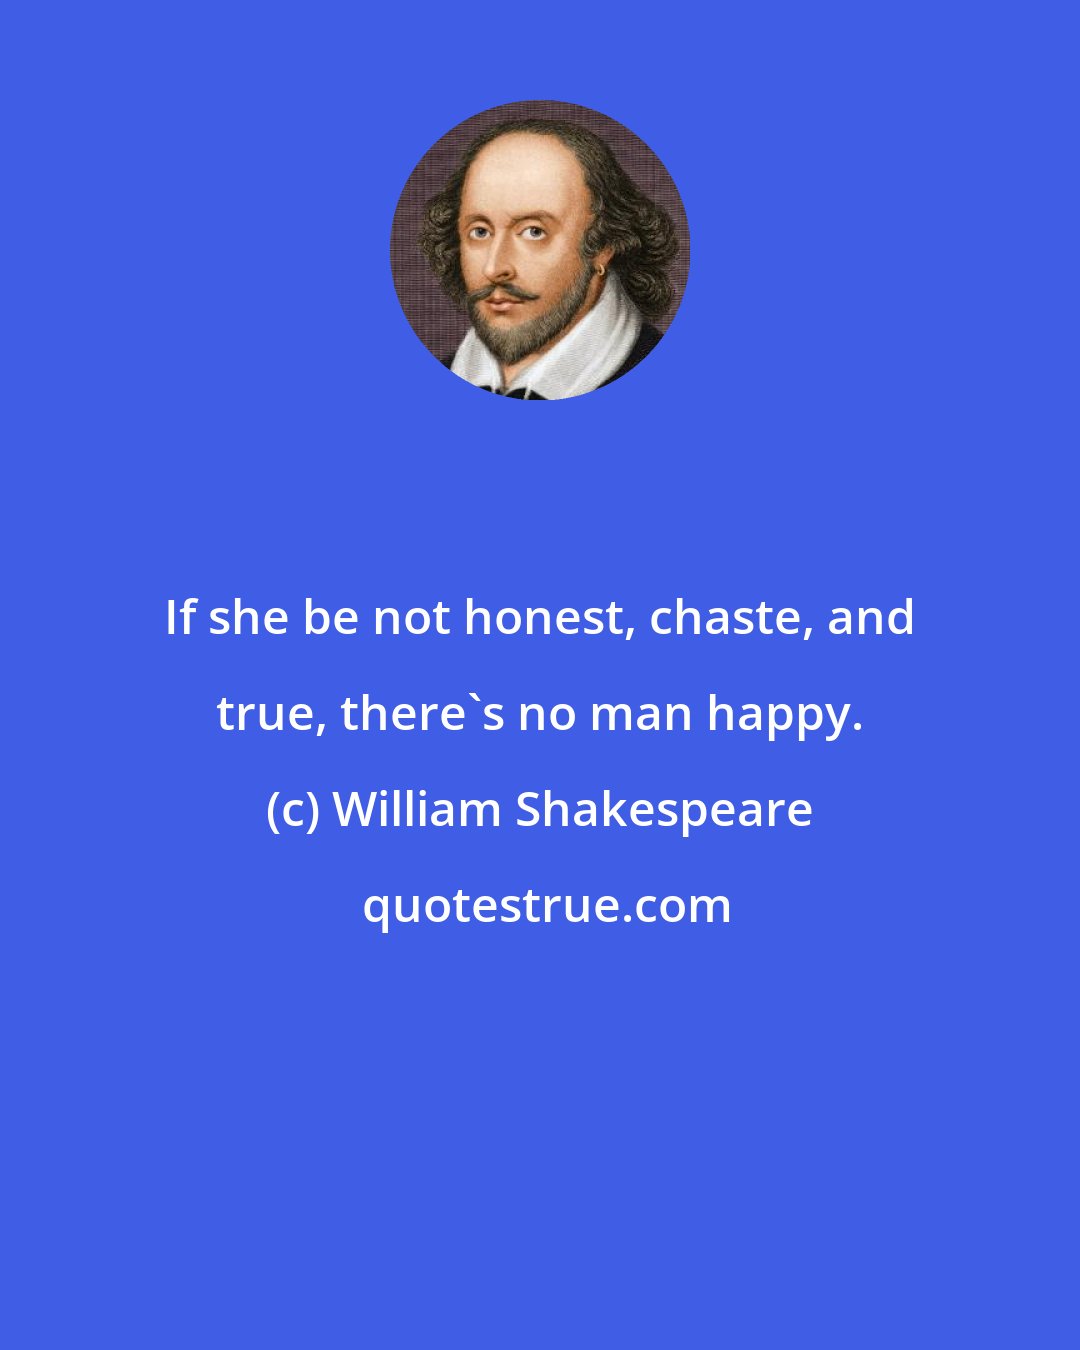 William Shakespeare: If she be not honest, chaste, and true, there's no man happy.